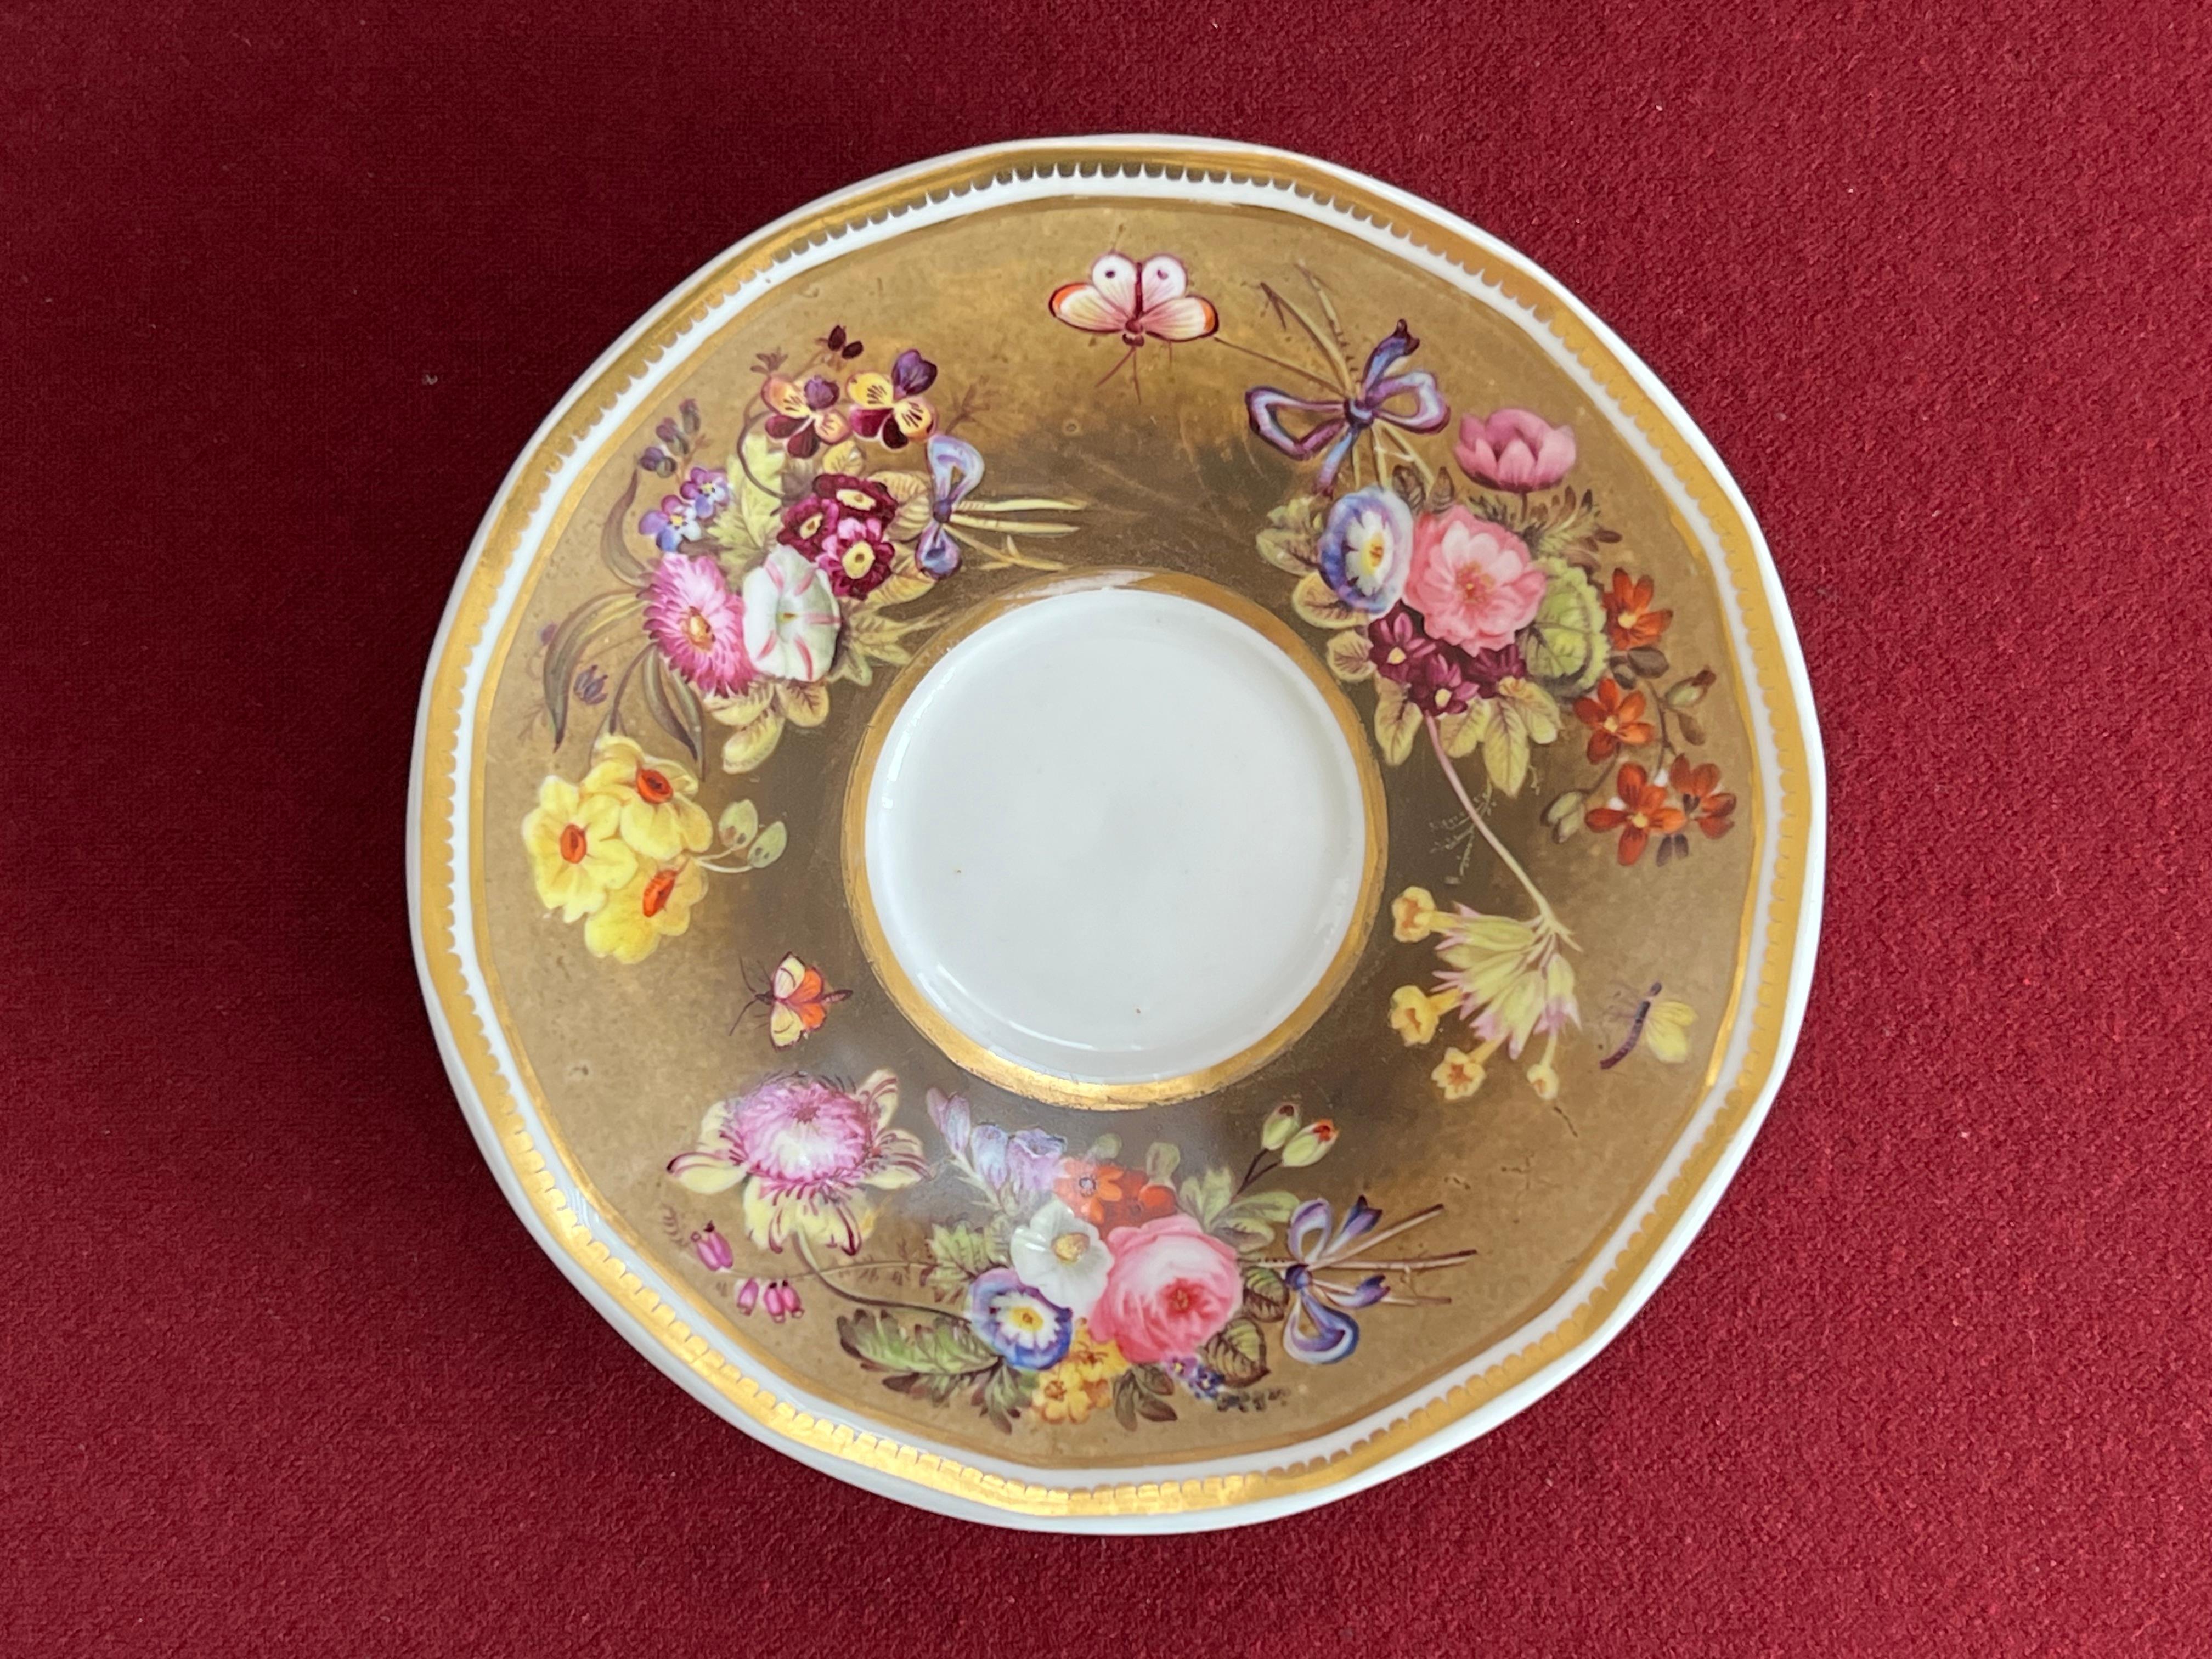 Porcelain A Spode porcelain Coffee Cup and Saucer very finely decorated c.1830 For Sale